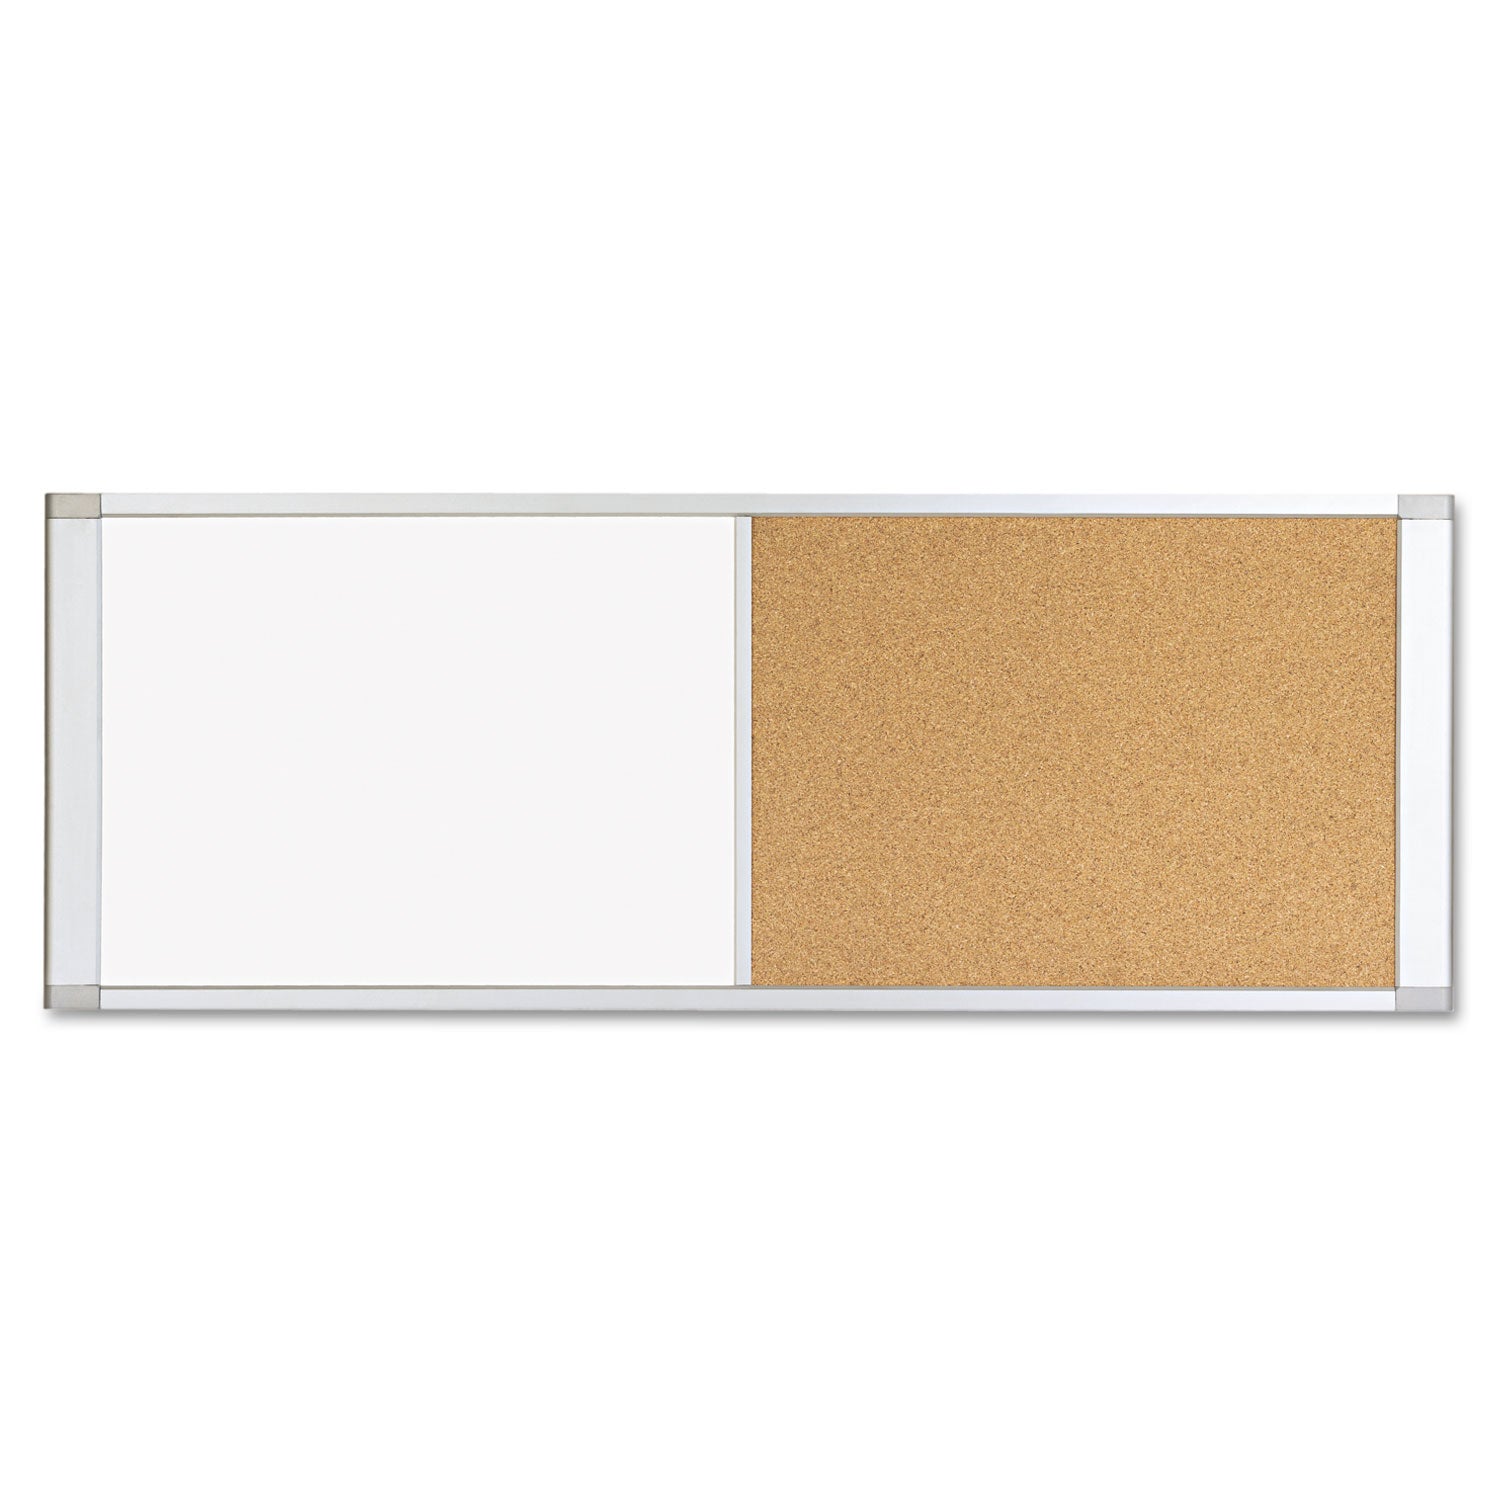 Combo Cubicle Workstation Dry Erase/Cork Board, 48 x 18, Tan/White Surface, Aluminum Frame - 